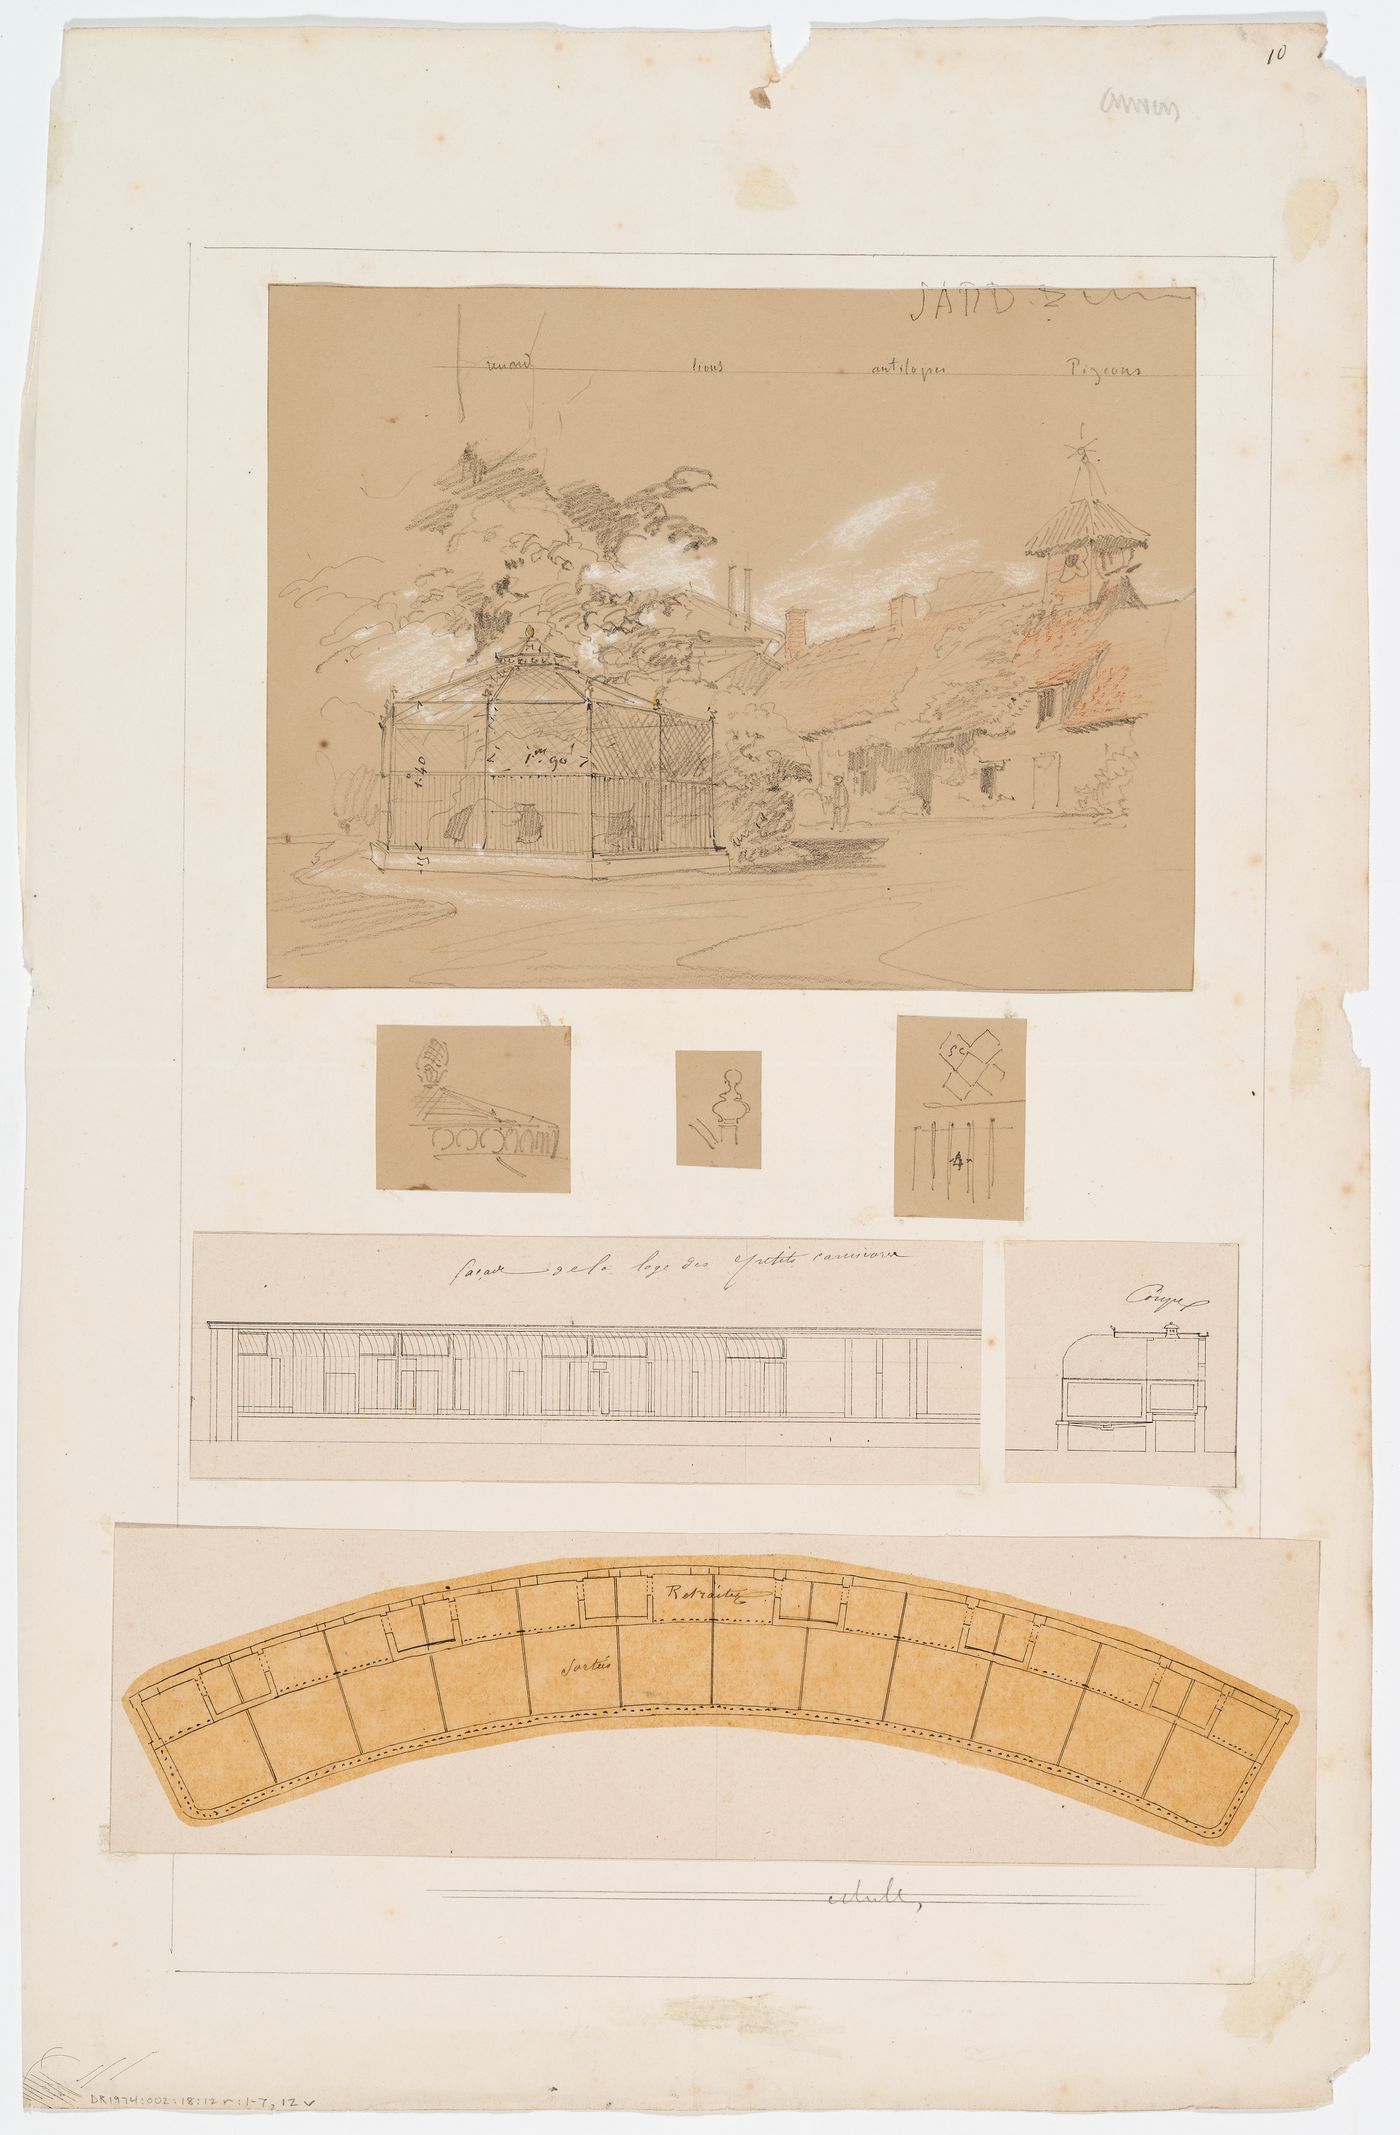 Zoological garden, Antwerp: Elevation, section, and plan of the small carnivores cage and perspective view and details of the garden buildings